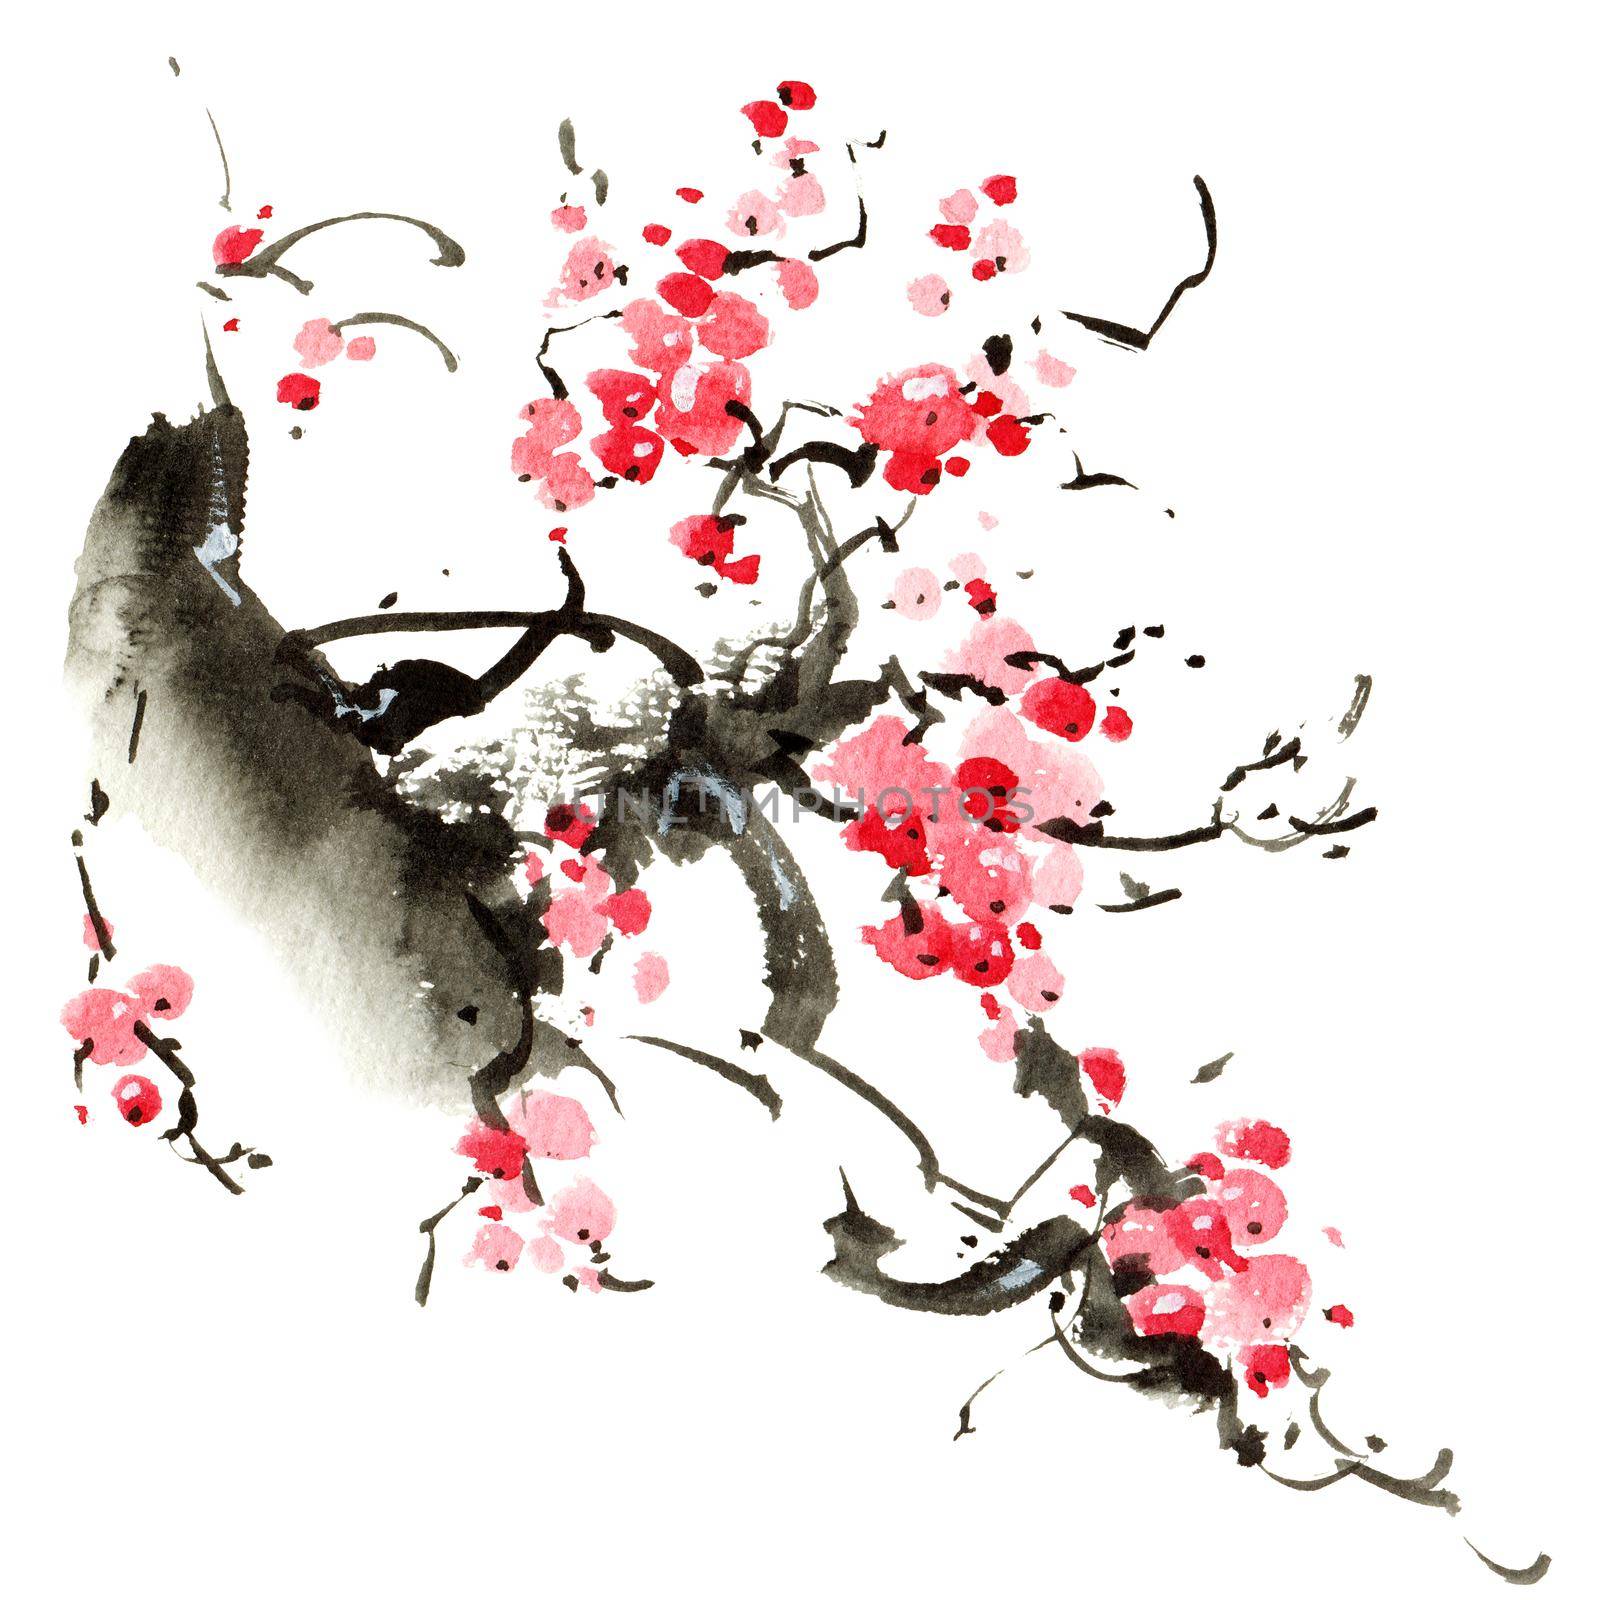 Watercolor and ink illustration of blossom sakura tree with pink flowers. Oriental traditional painting by ink and watercolor in sumi-e style.